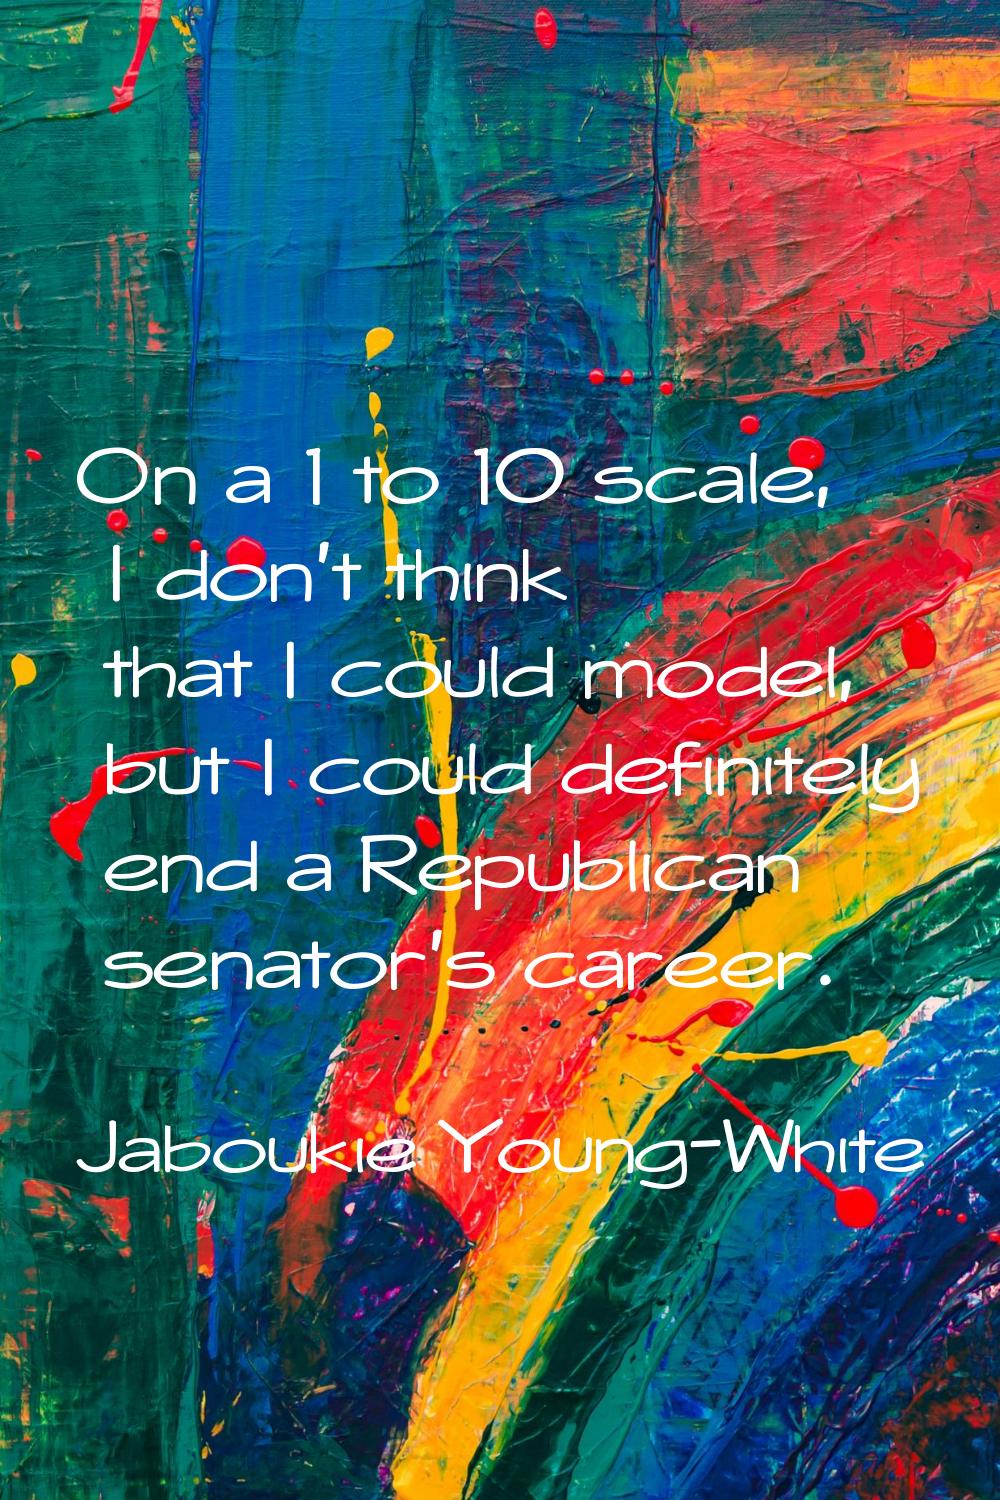 On a 1 to 10 scale, I don't think that I could model, but I could definitely end a Republican senat